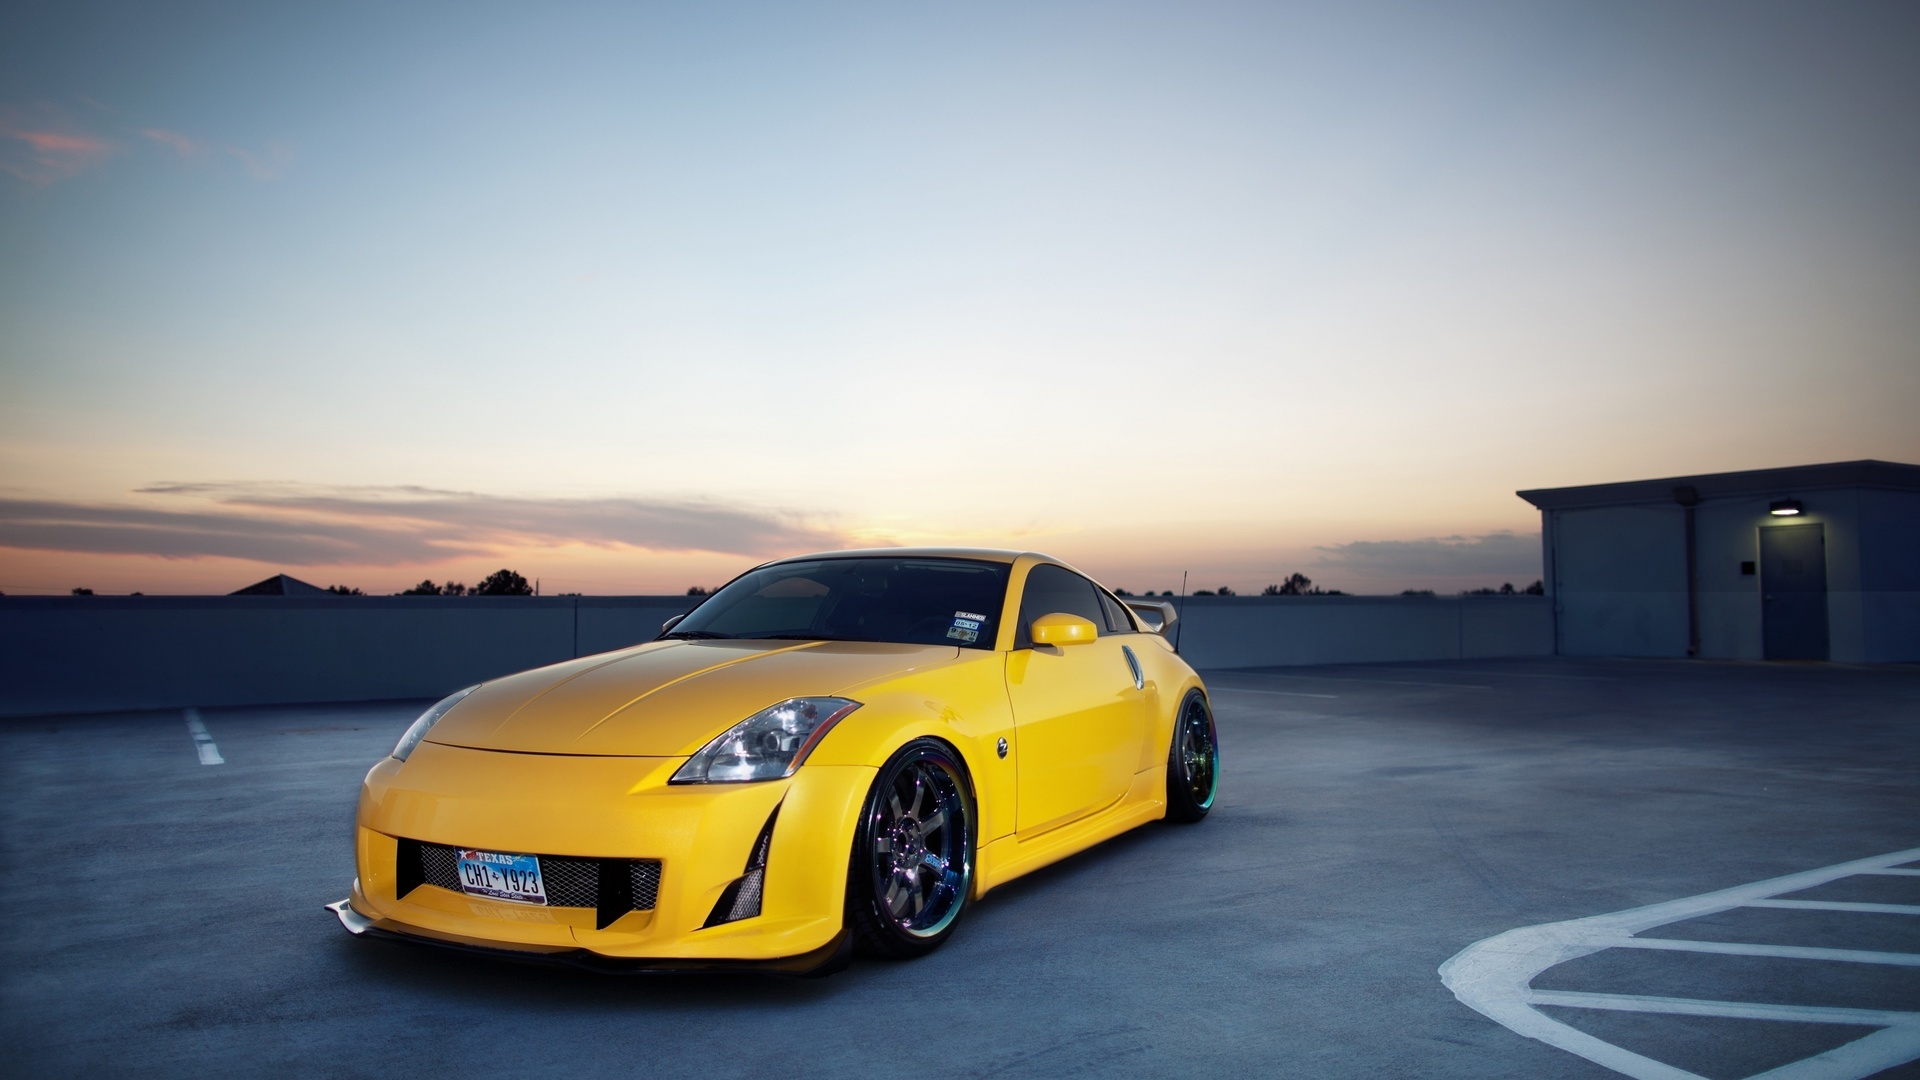 350z, tuning, tuning auto, parking, photo, Auto, city, nissan 350z, cars, nissan, wallpapers auto